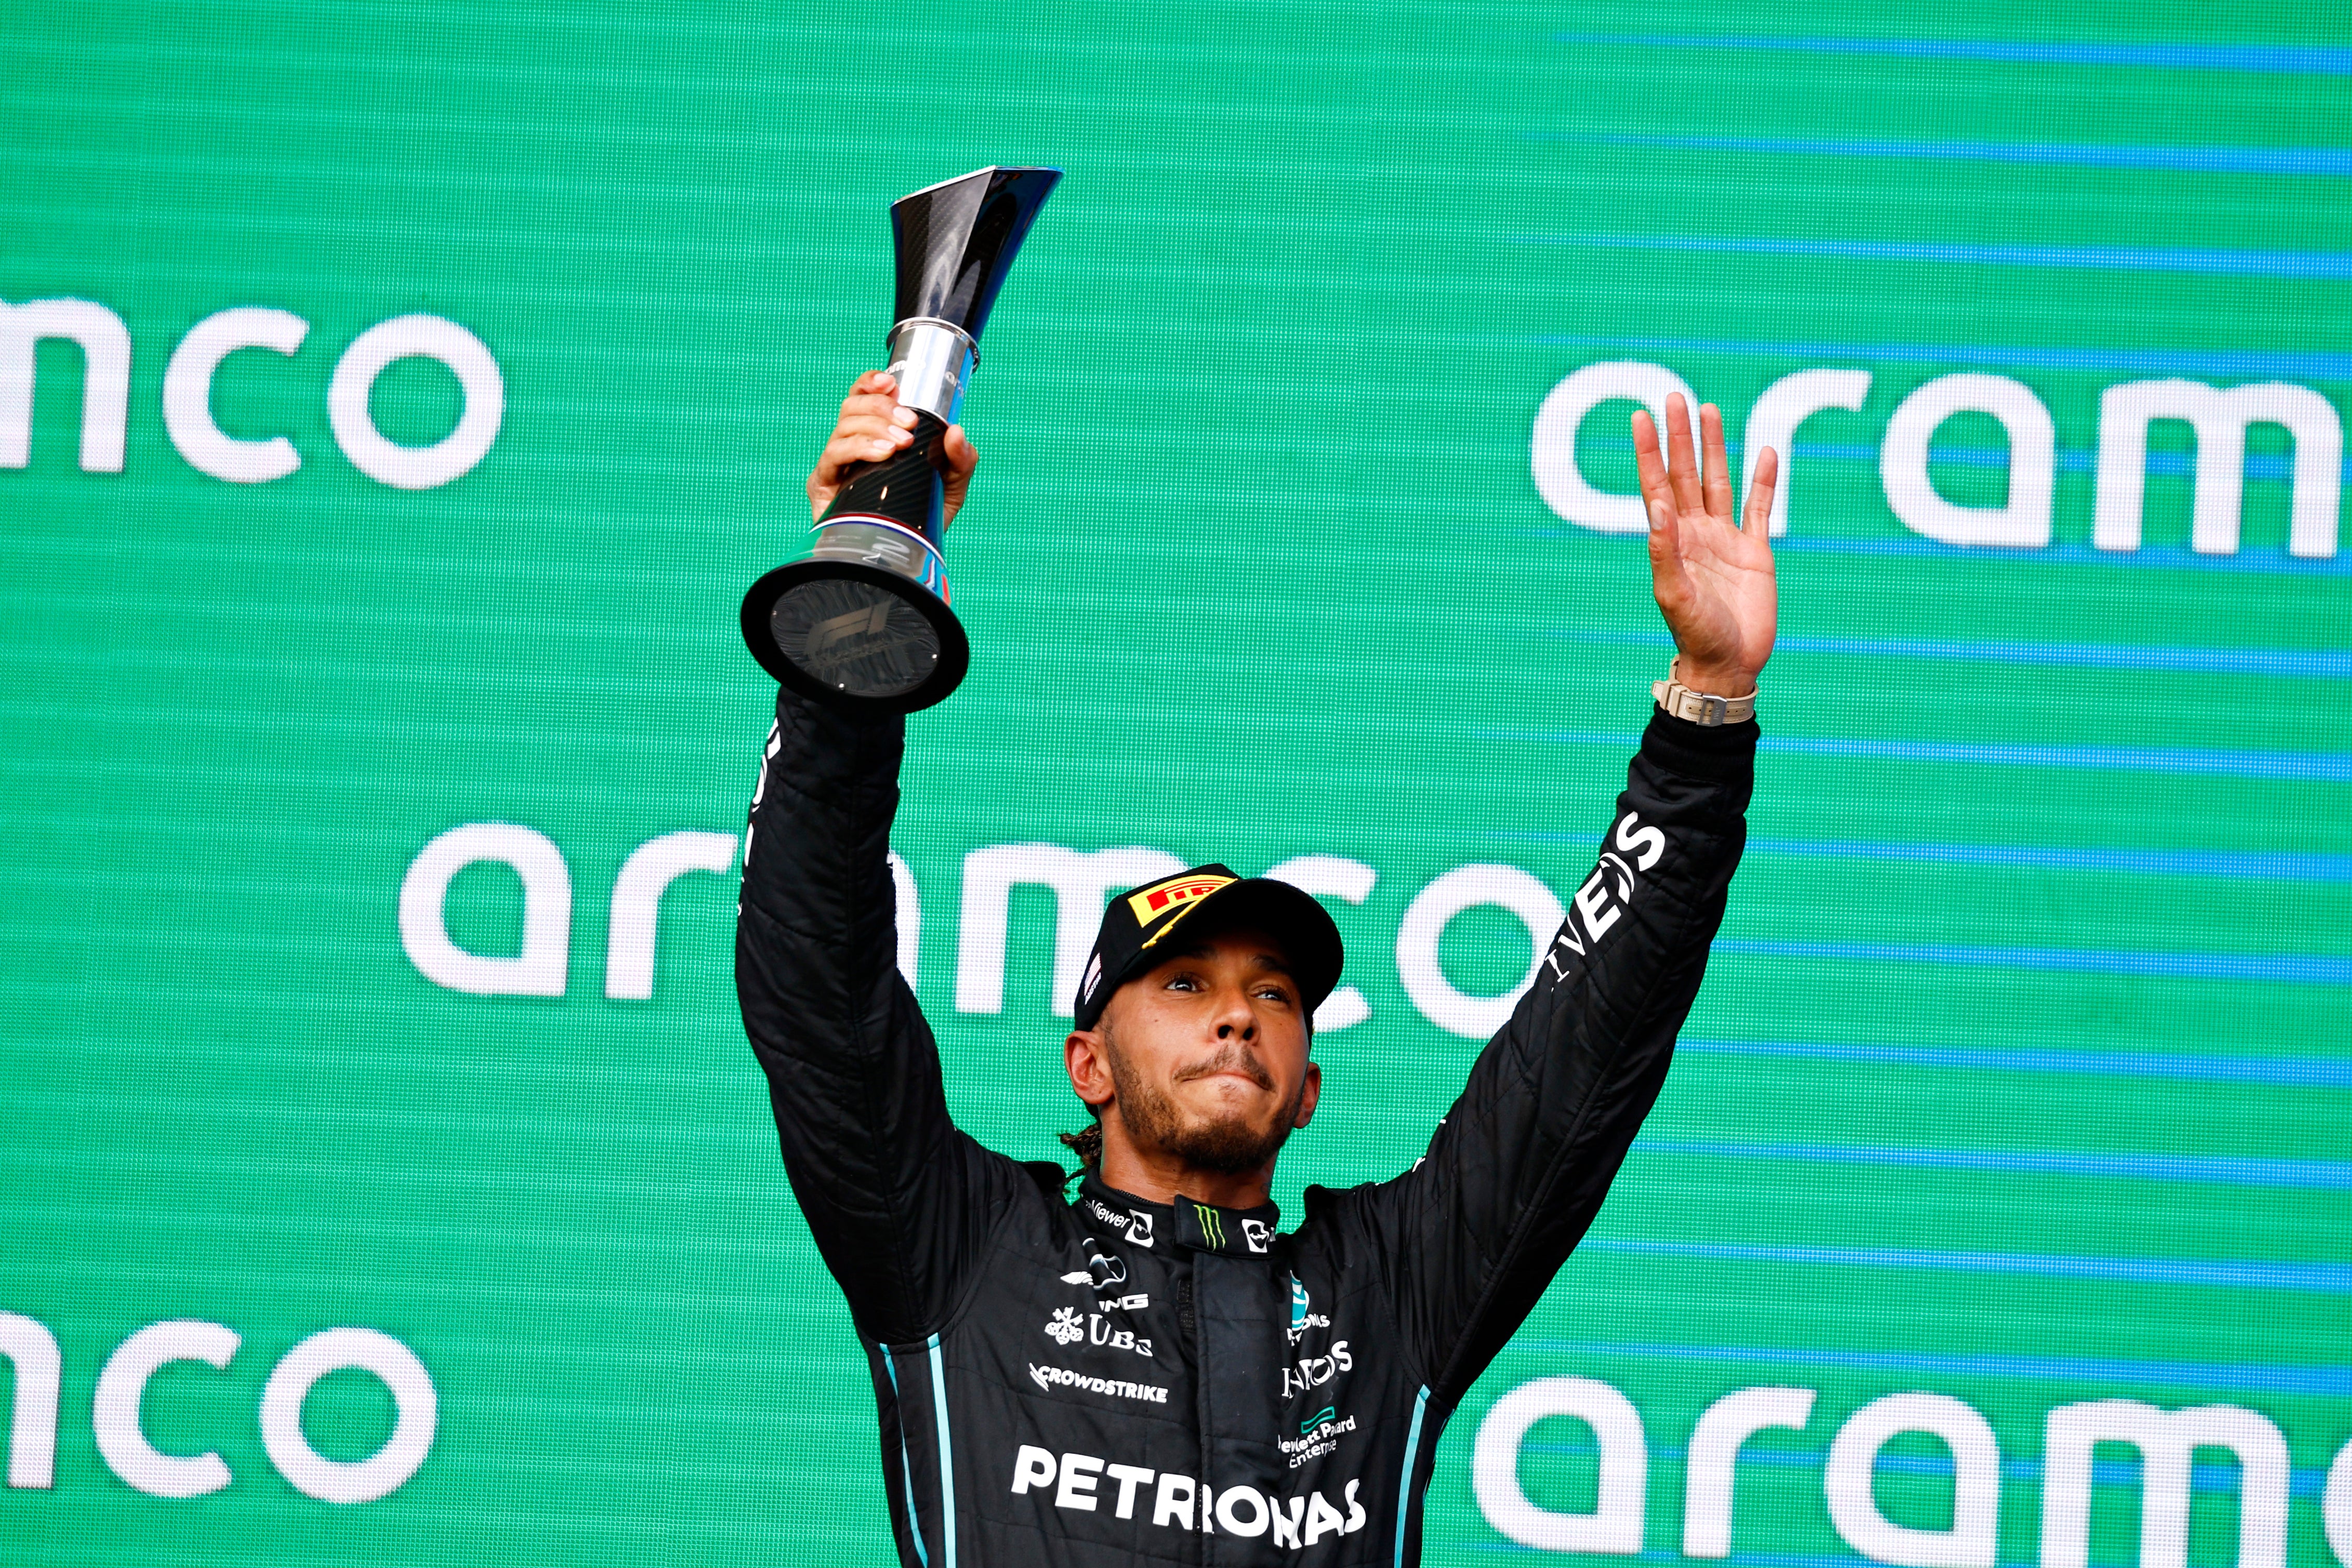 Lewis Hamilton said his narrow defeat at Sunday’s US GP fills him with hope that he can be a winner again